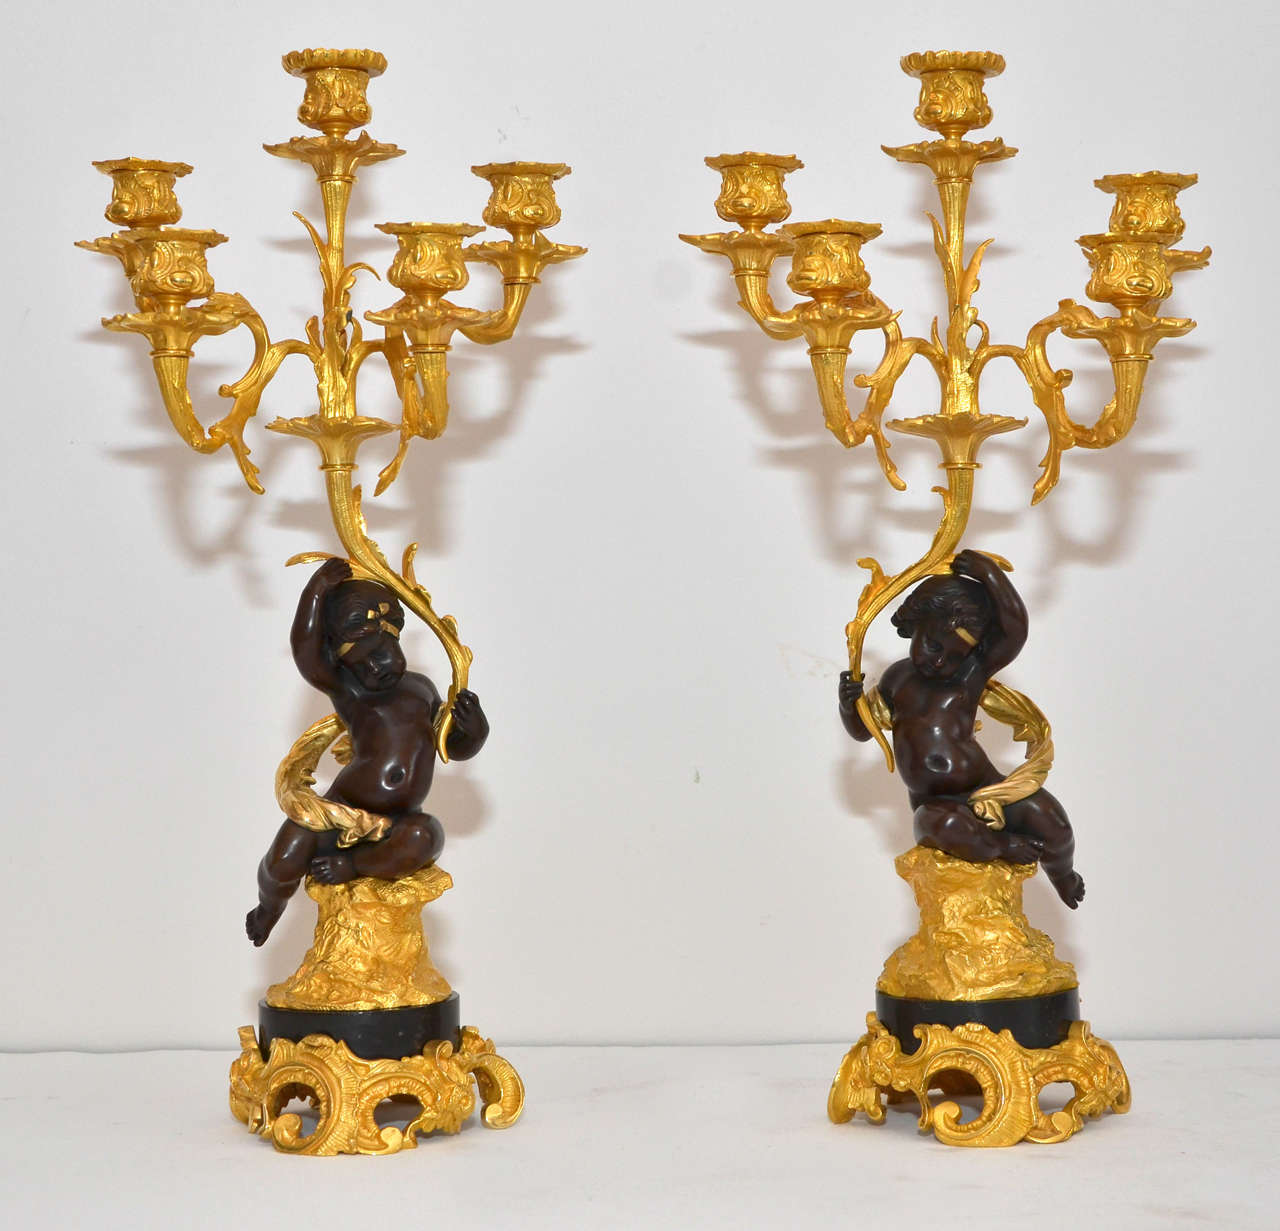 pair of double patina bronze candelabras, representing putti holding  5 arms of candelsticks.